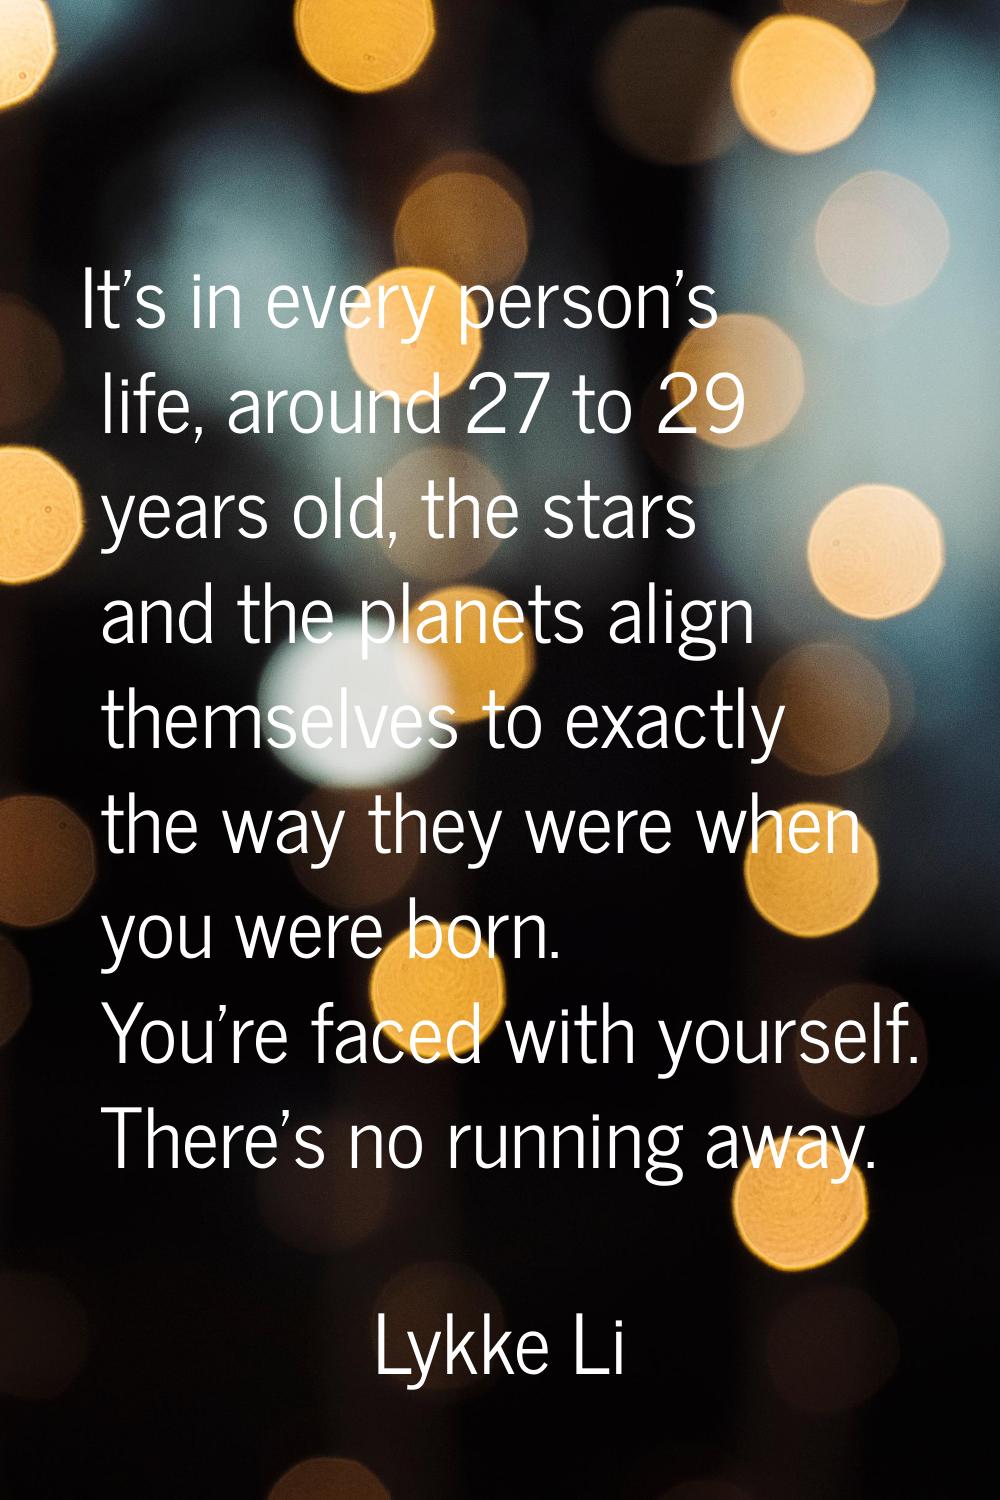 It's in every person's life, around 27 to 29 years old, the stars and the planets align themselves 